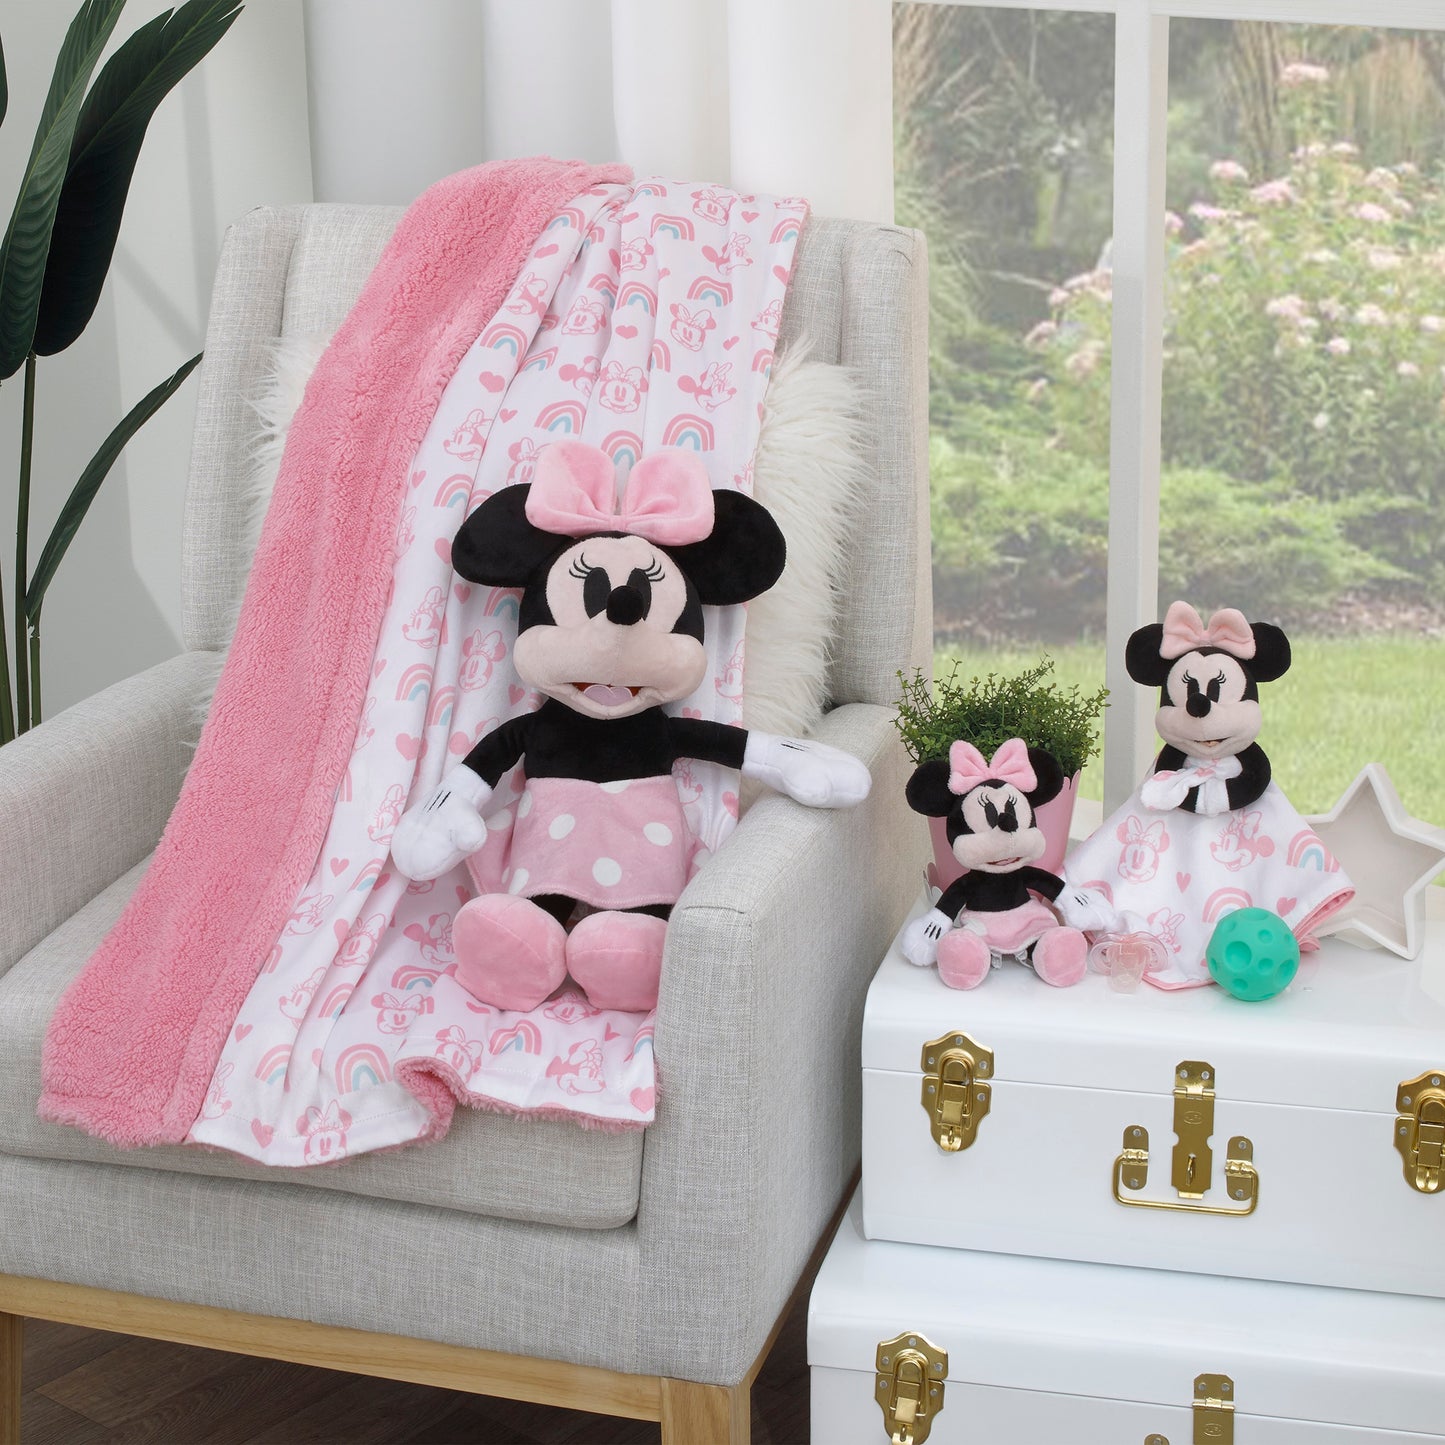 Disney Minnie Mouse White, Pink and Black with Polka Dot Skirt Plush Buddy Pacifier Holder